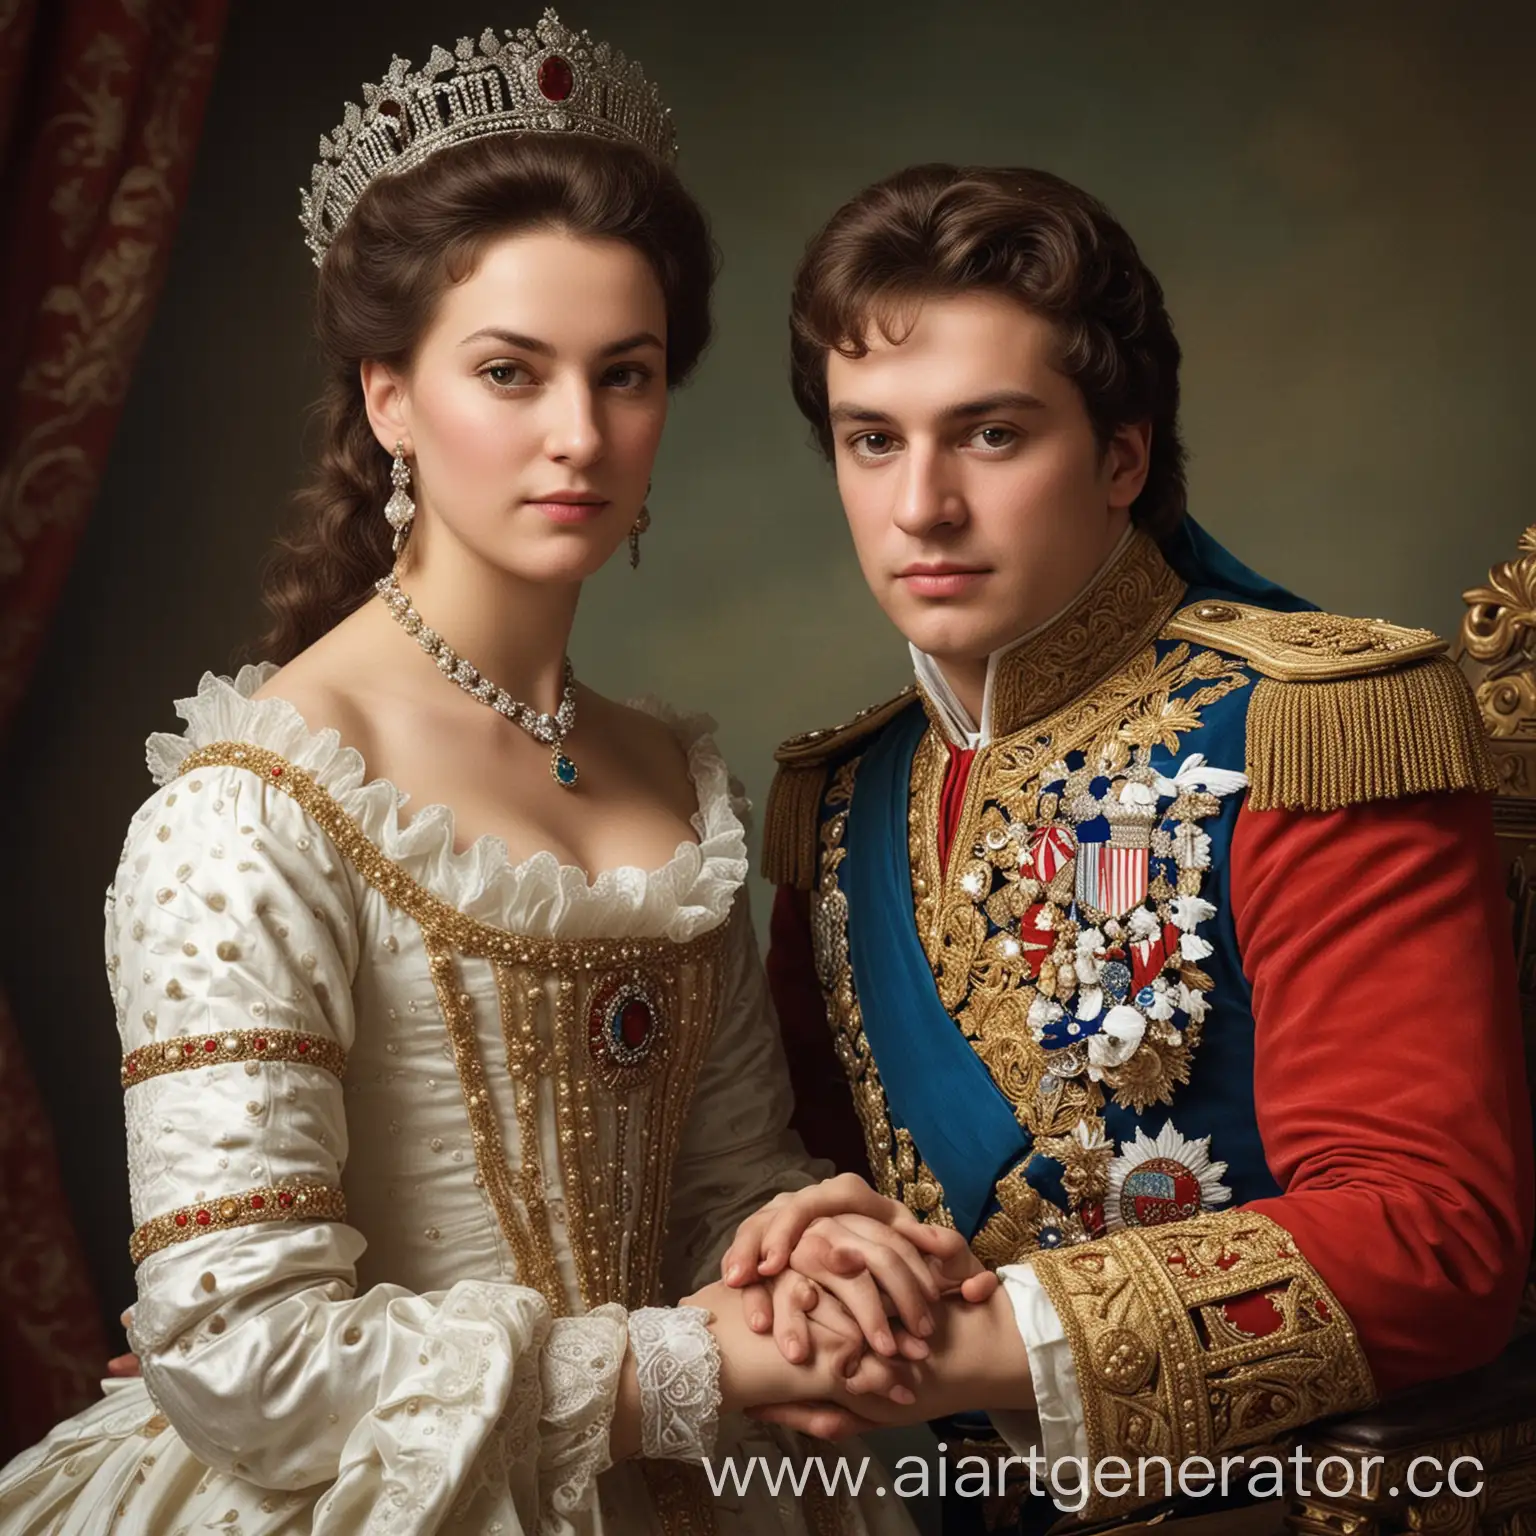 Empress-Catherine-II-and-Grigory-Potemkin-Romantic-Portrait-of-18th-Century-Royalty